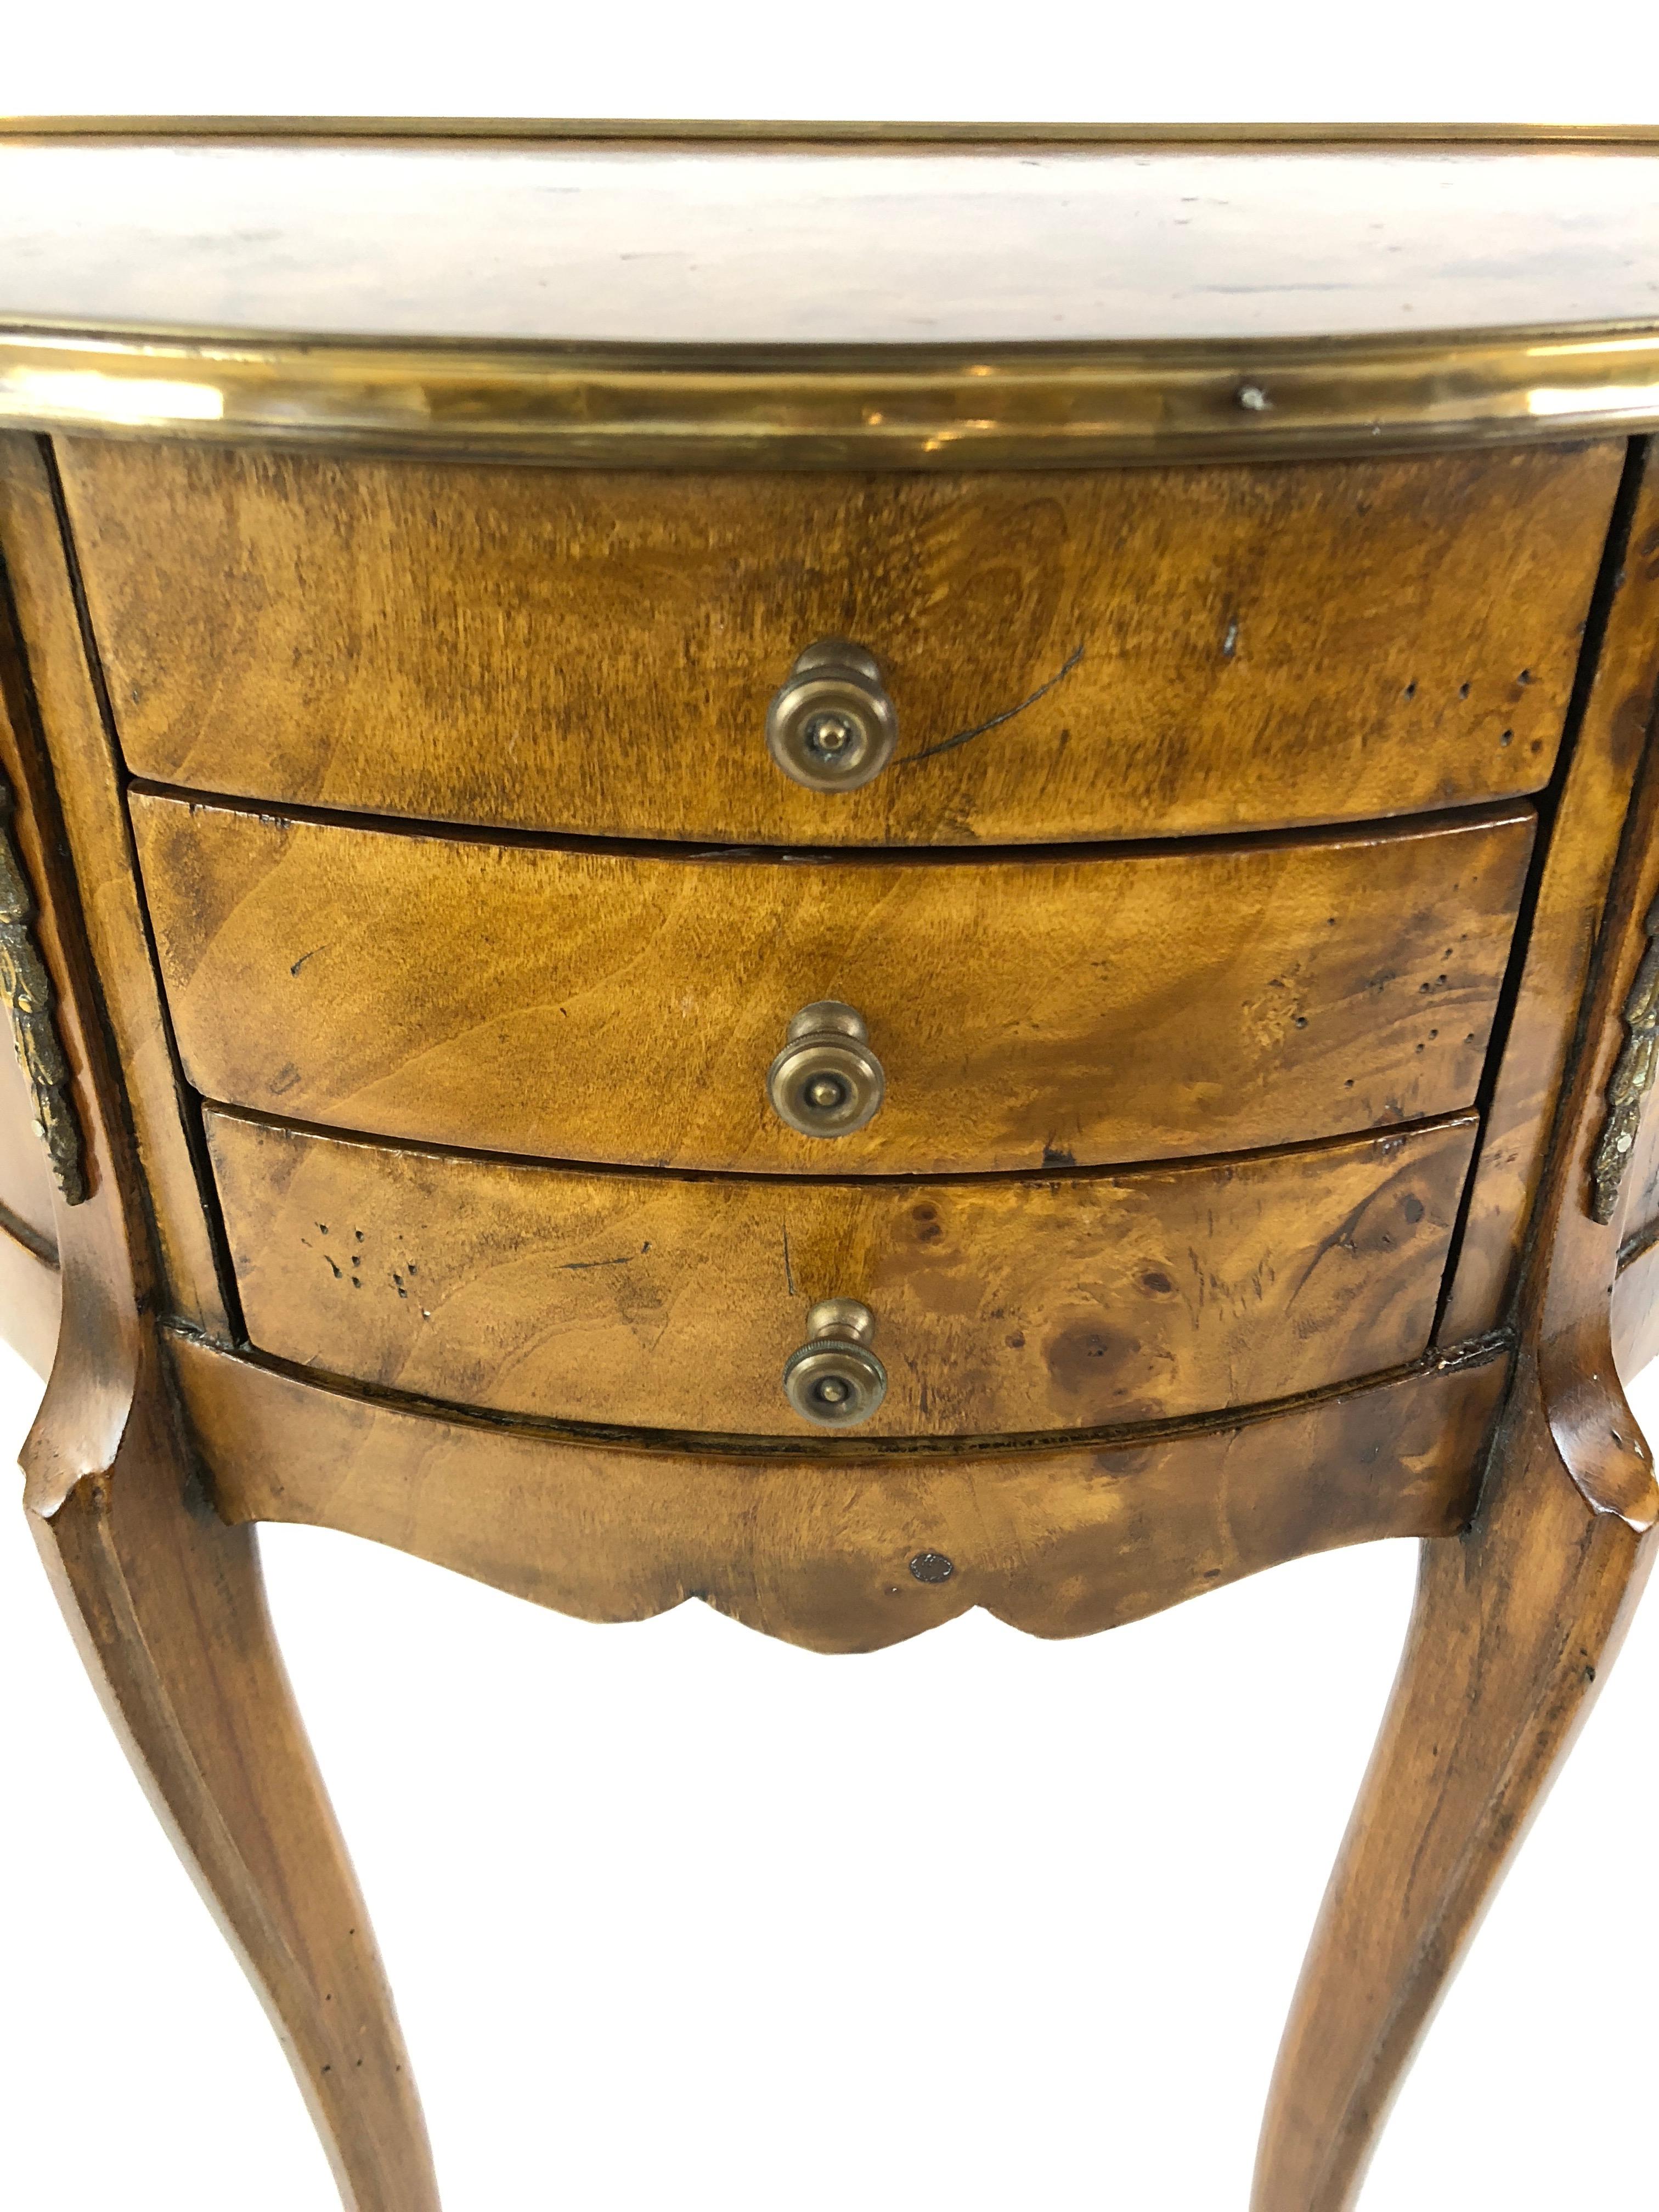 Gorgeous burl wood demilune commode having brass frame around the top, lovely brass embellishments, 3 drawers, elegant cabriole legs with brass caps and finished on the back.